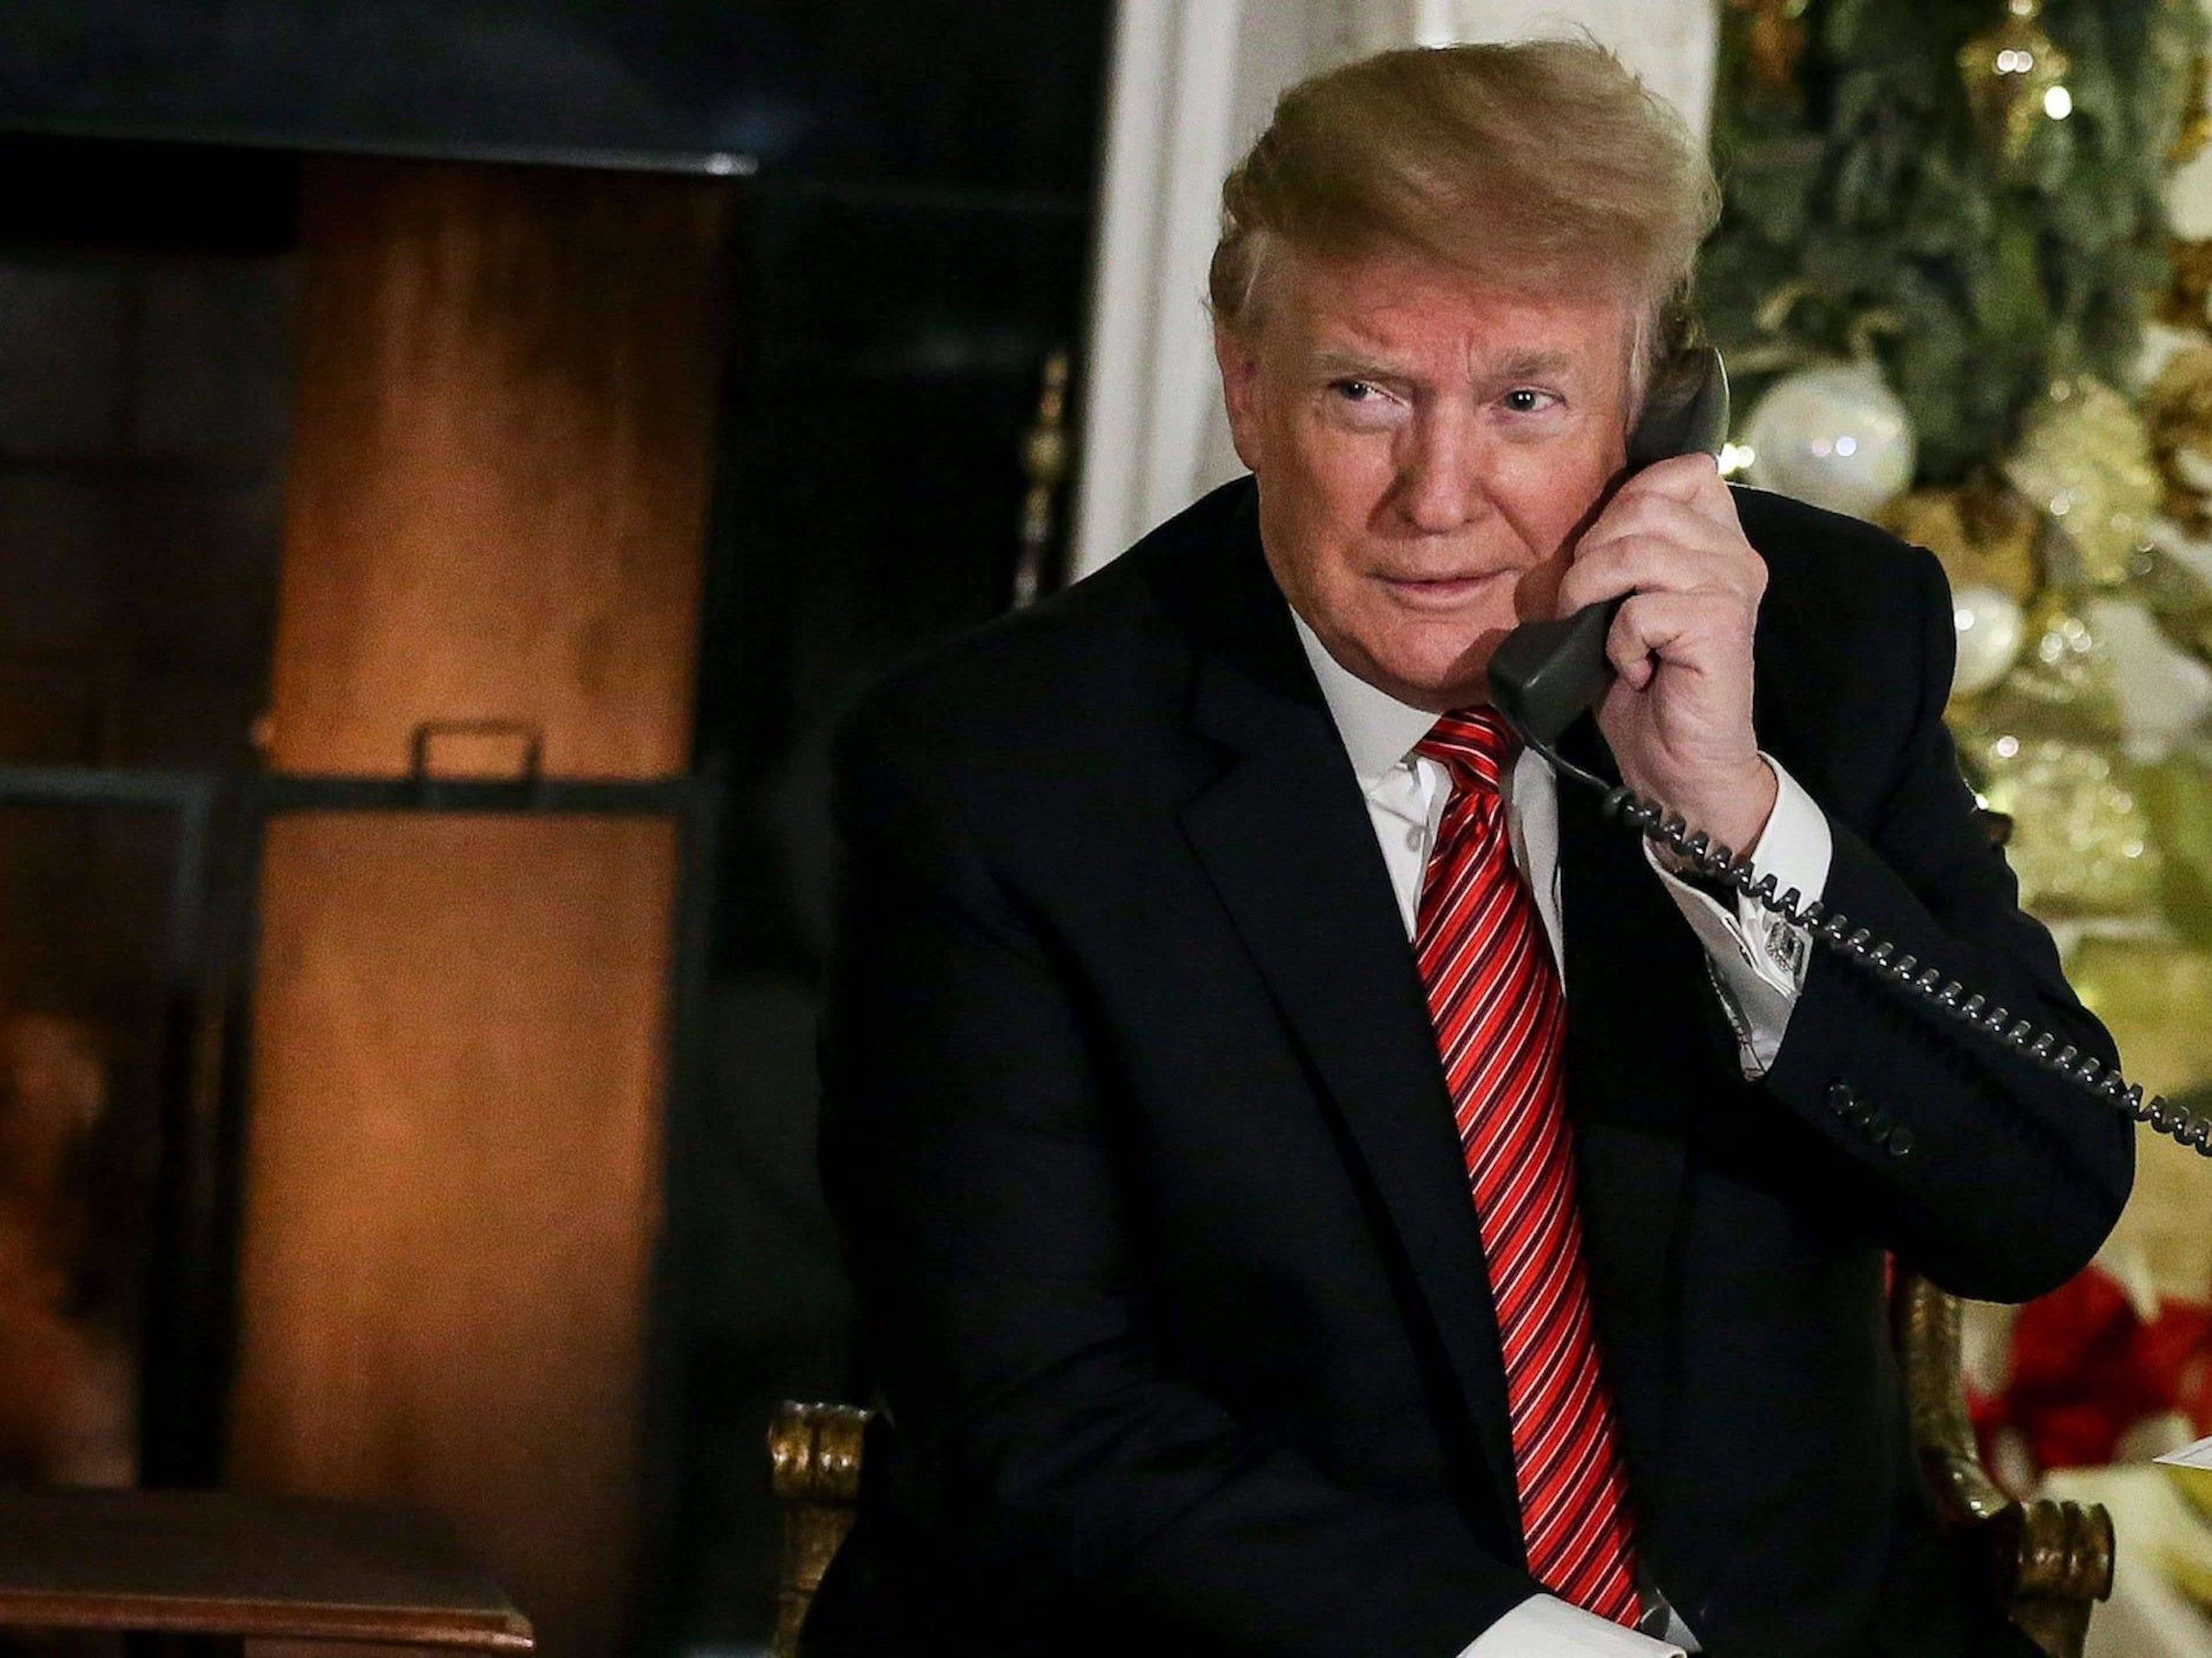 Trump was 'near-sadistic' in phone calls with female world leaders, according to CNN report on classified calls